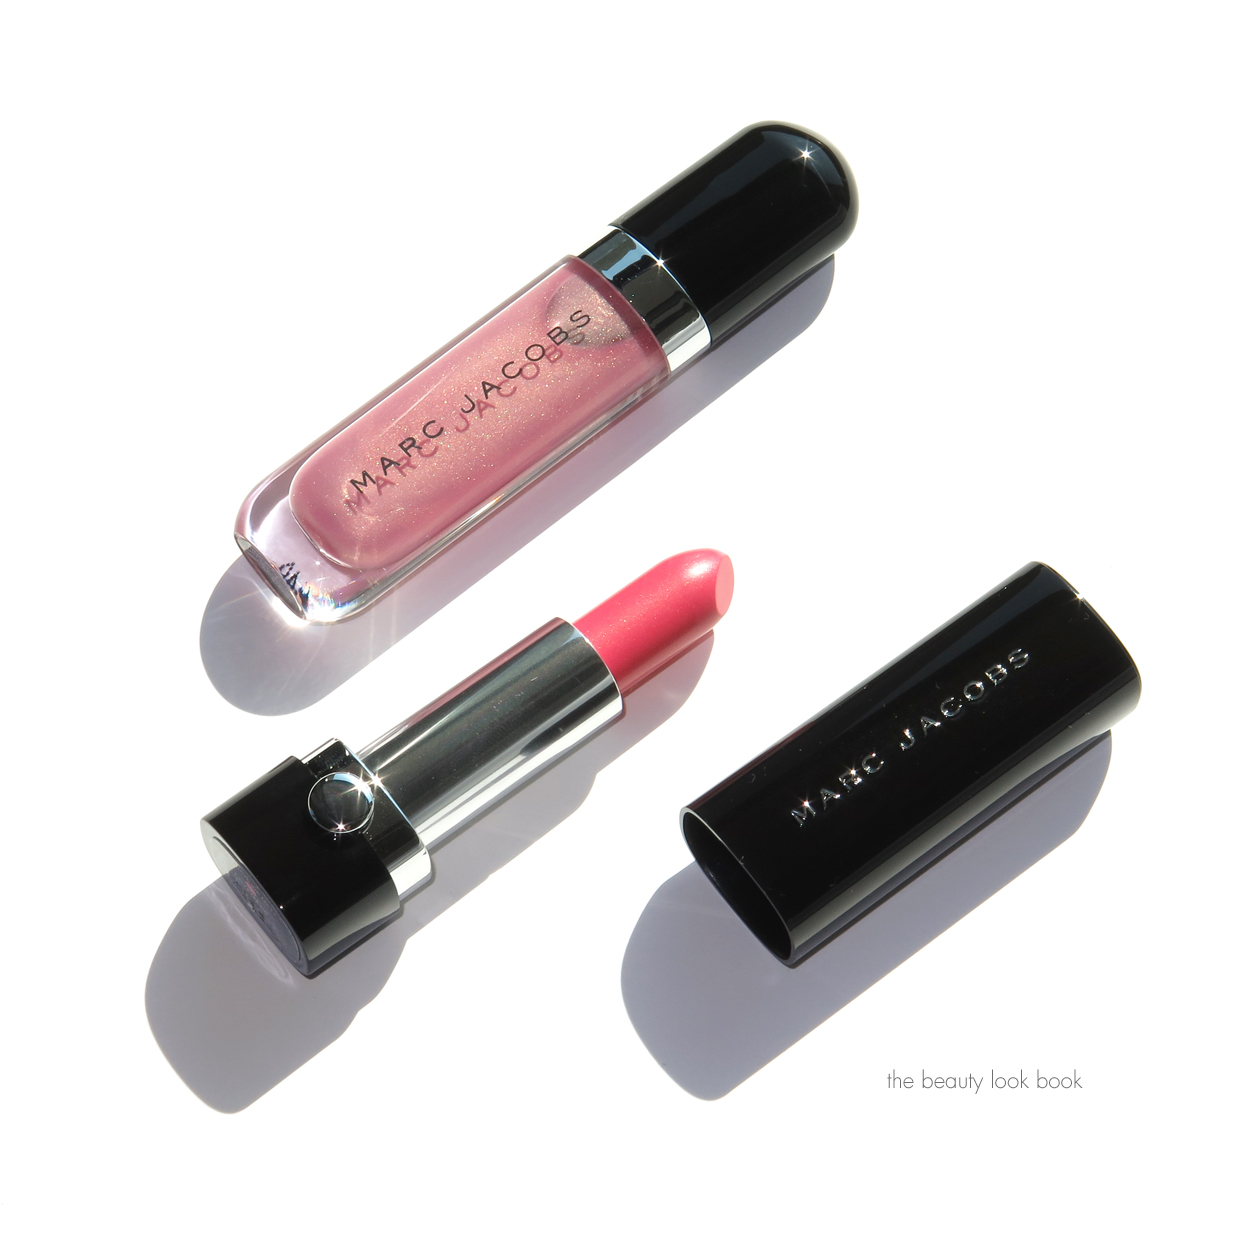 Marc Jacobs Beauty Lovemarc Lip Gel in Have We Met? and Lust for Lacquer  Lip Vinyl Sheer in Pink Diamond - The Beauty Look Book